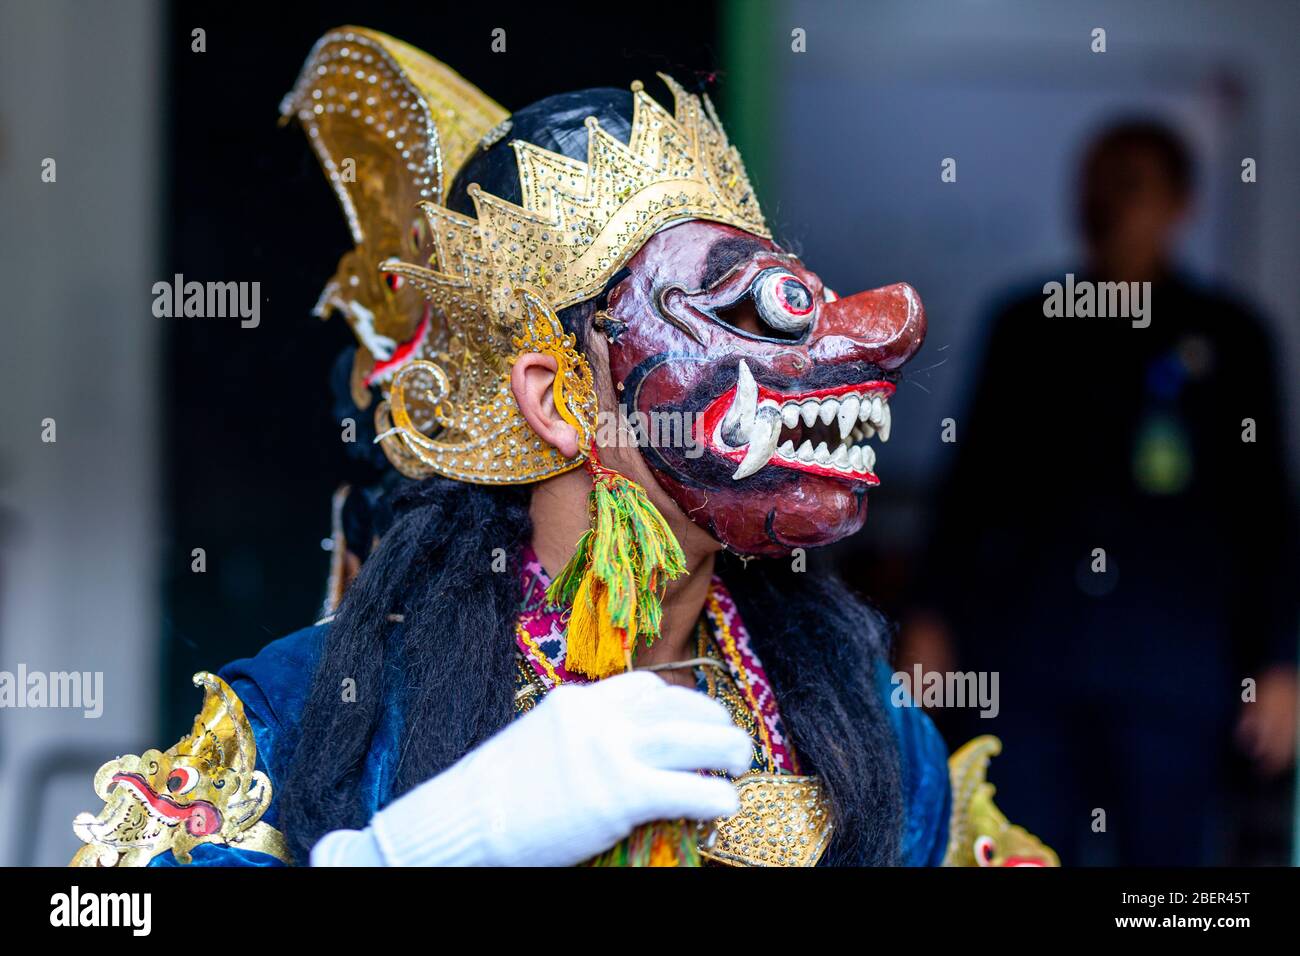 A Traditional Javanese Dance Performer At The Sultan’s Palace (The Kraton), Yogyakarta, Java, Indonesia. Stock Photo